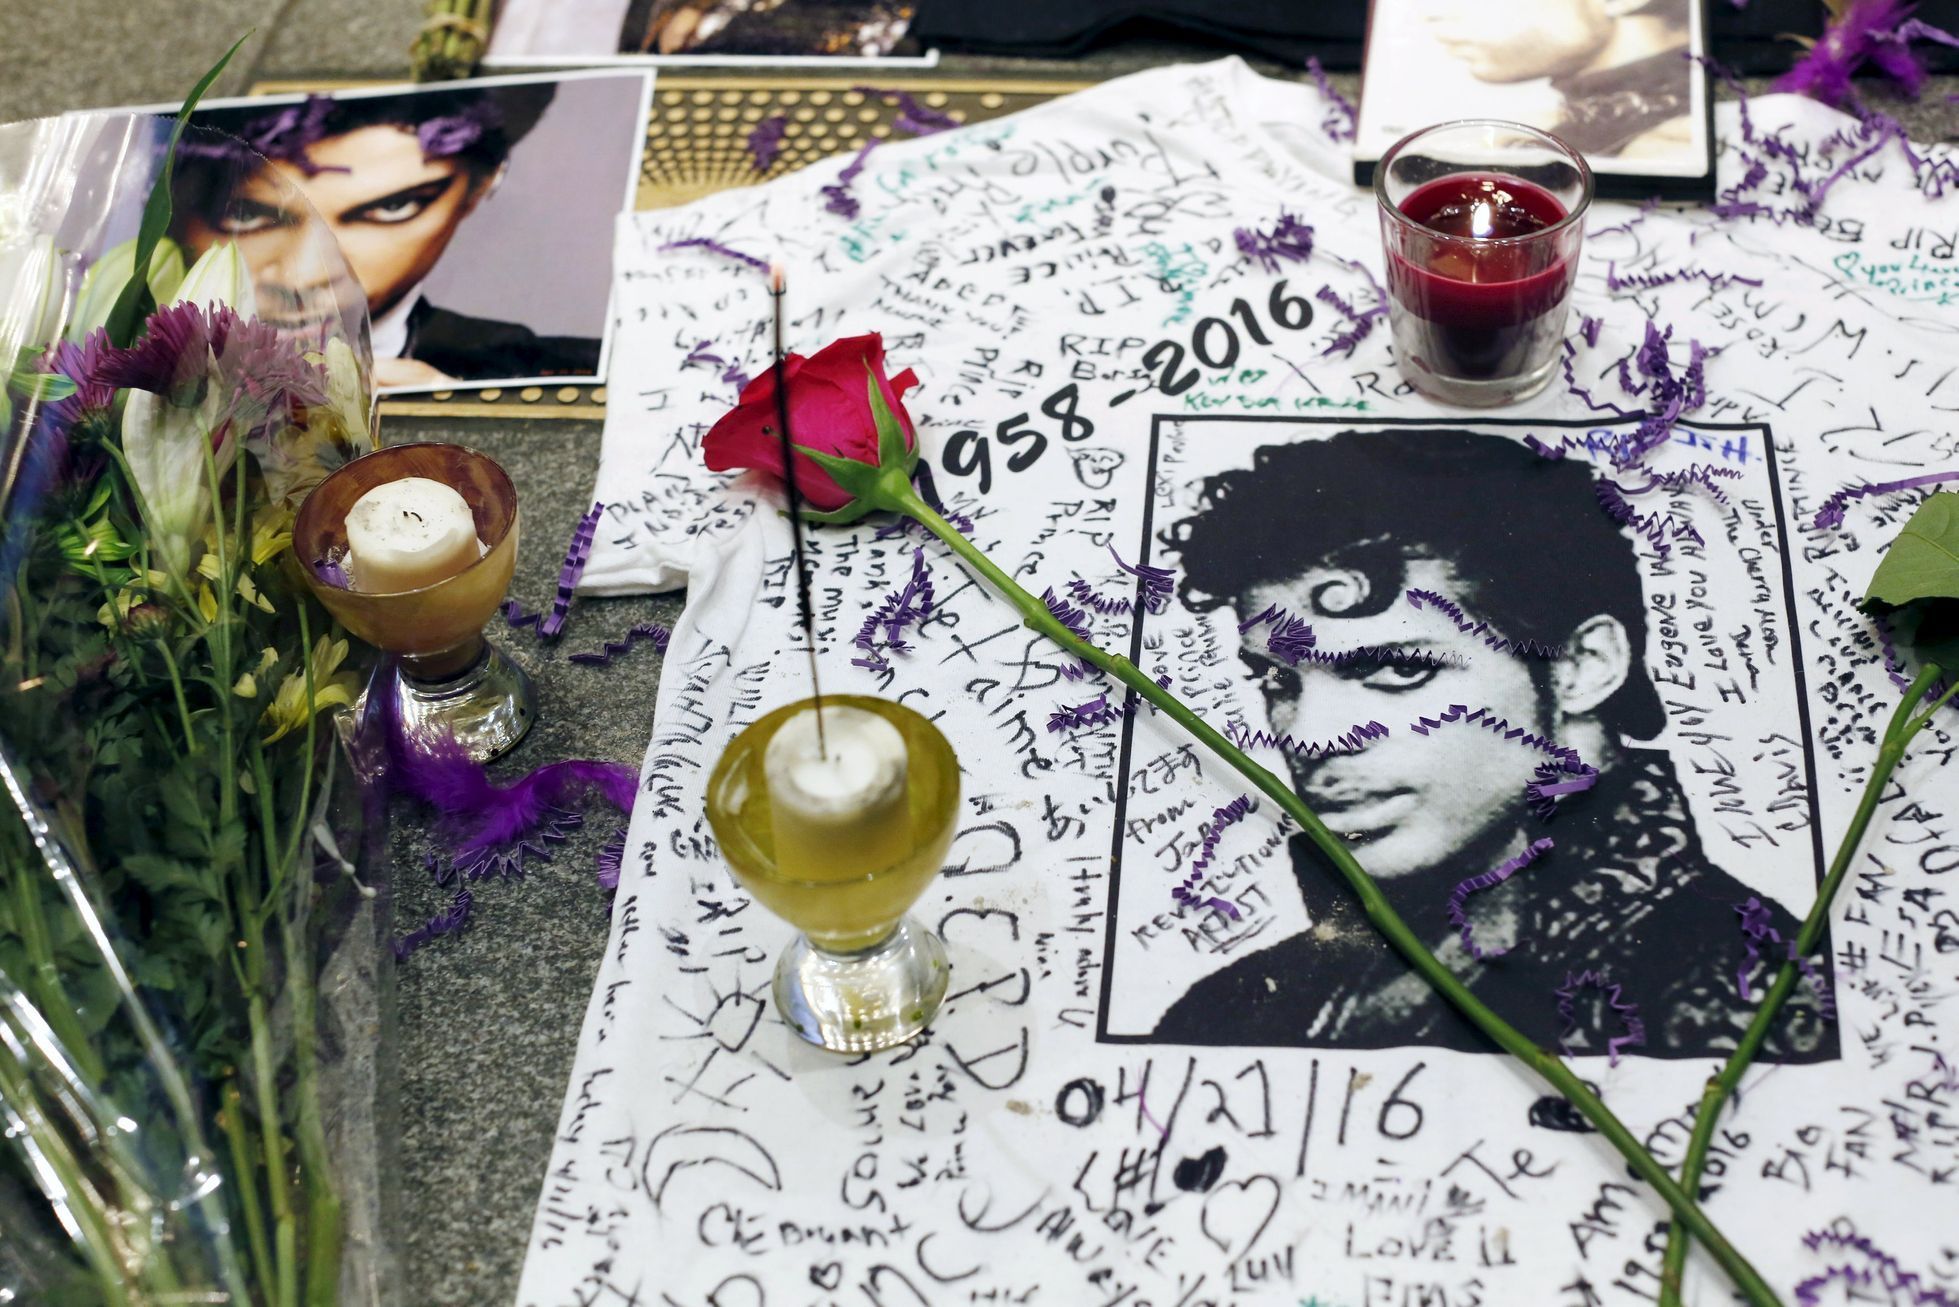 A makeshift memorial is seen as fans gather at Harlem's Apollo Theater to celebrate the life of deceased musician Prince in the Manhattan borough of New York, U.S.